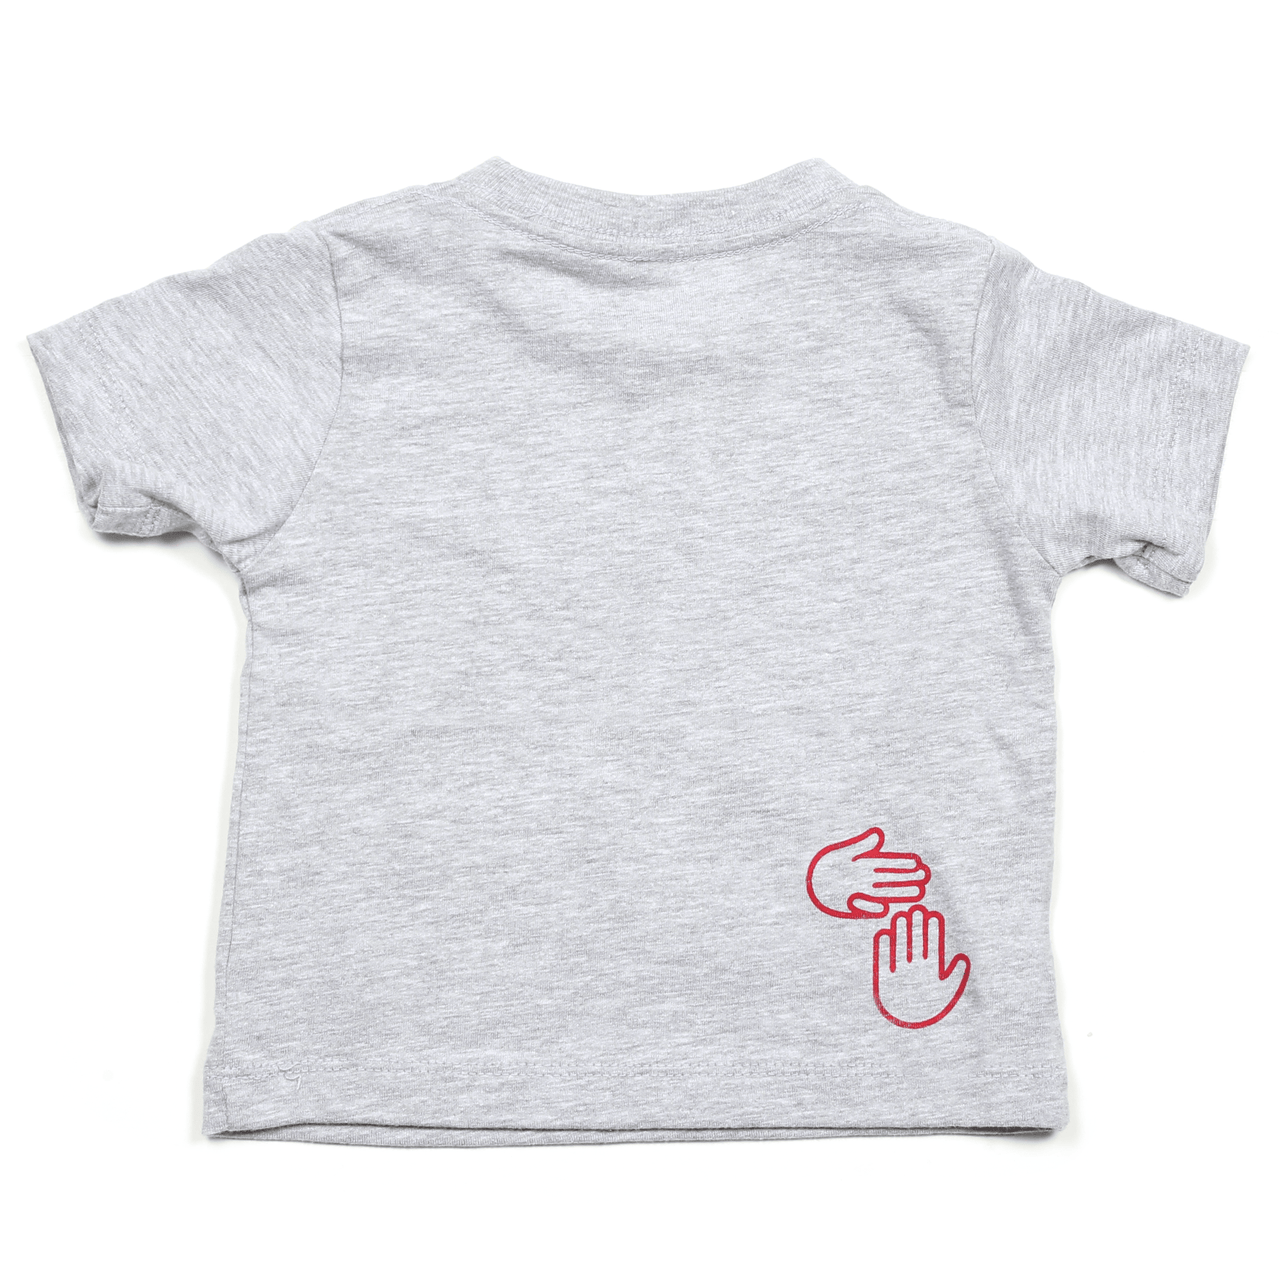 Traverse City: More Than Cherries Infant Tee